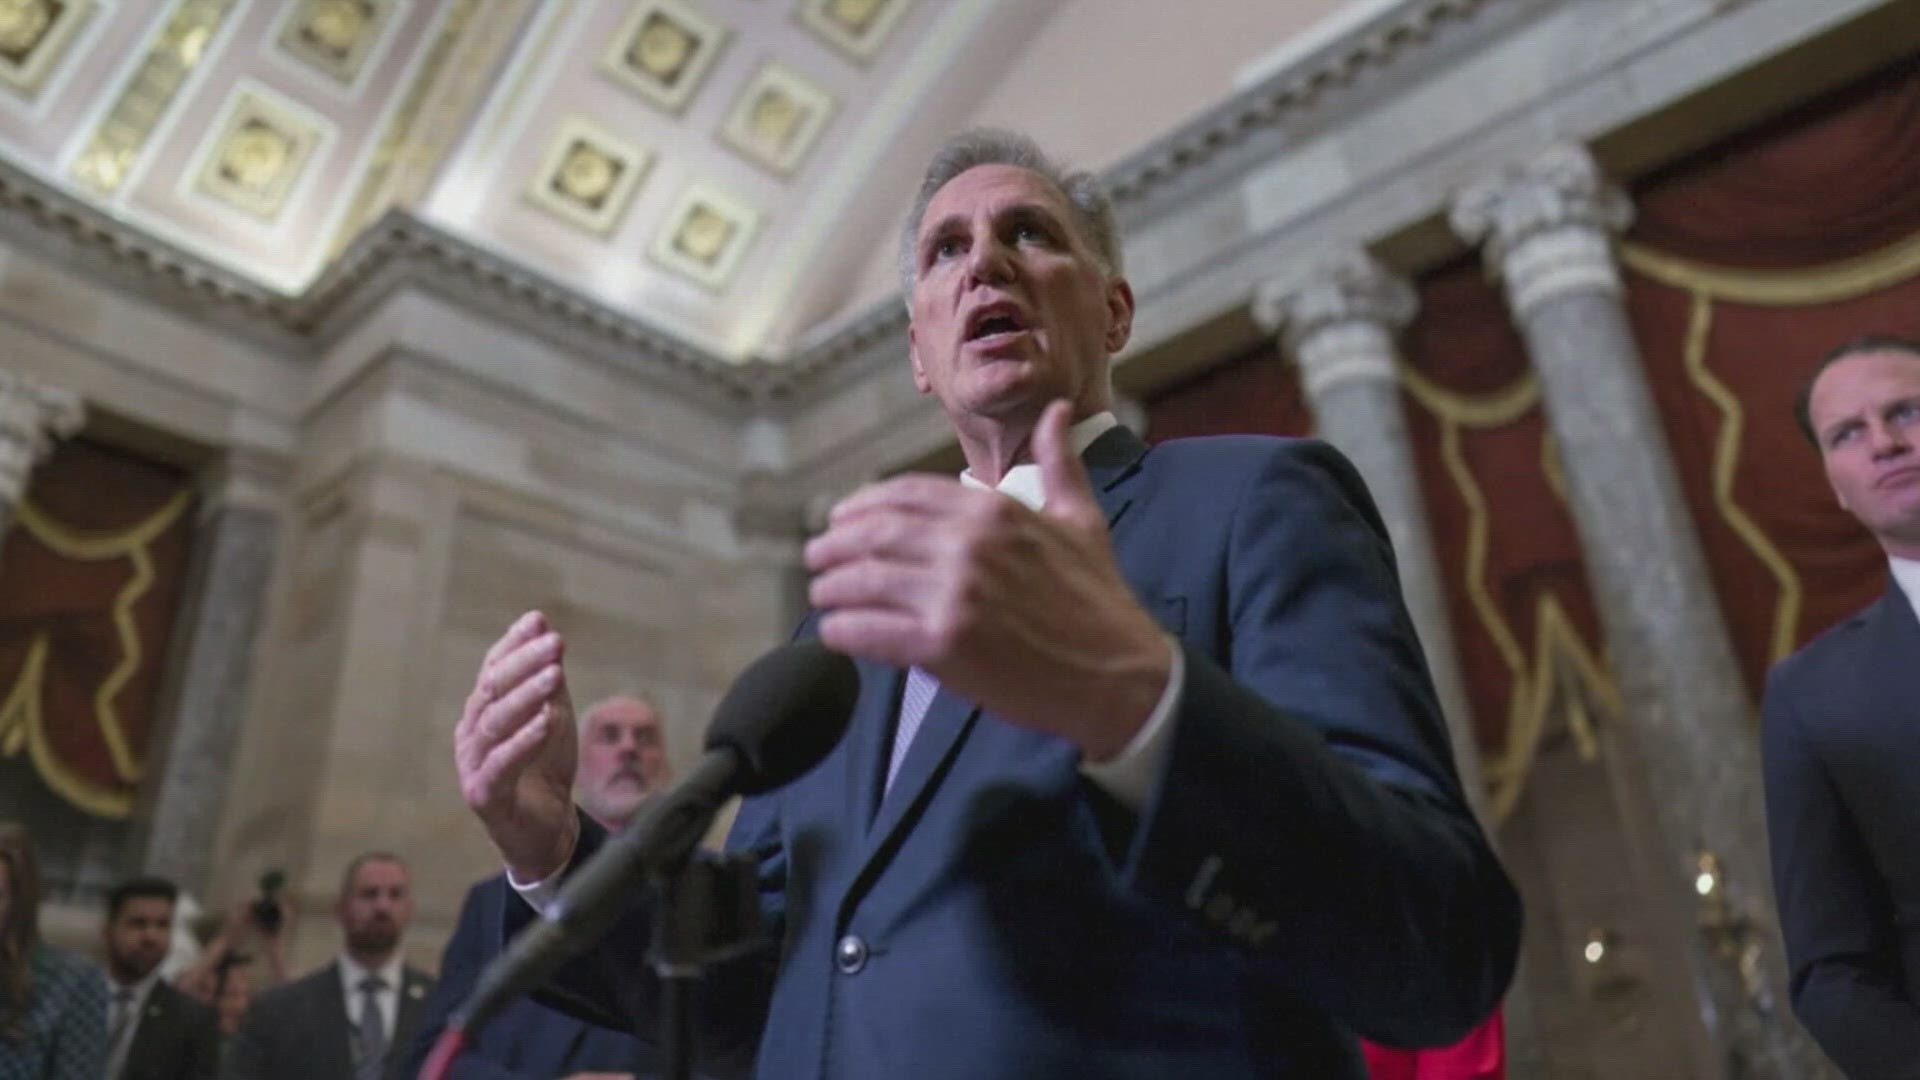 In a historic vote, McCarthy was the first speaker to be ousted from the position.